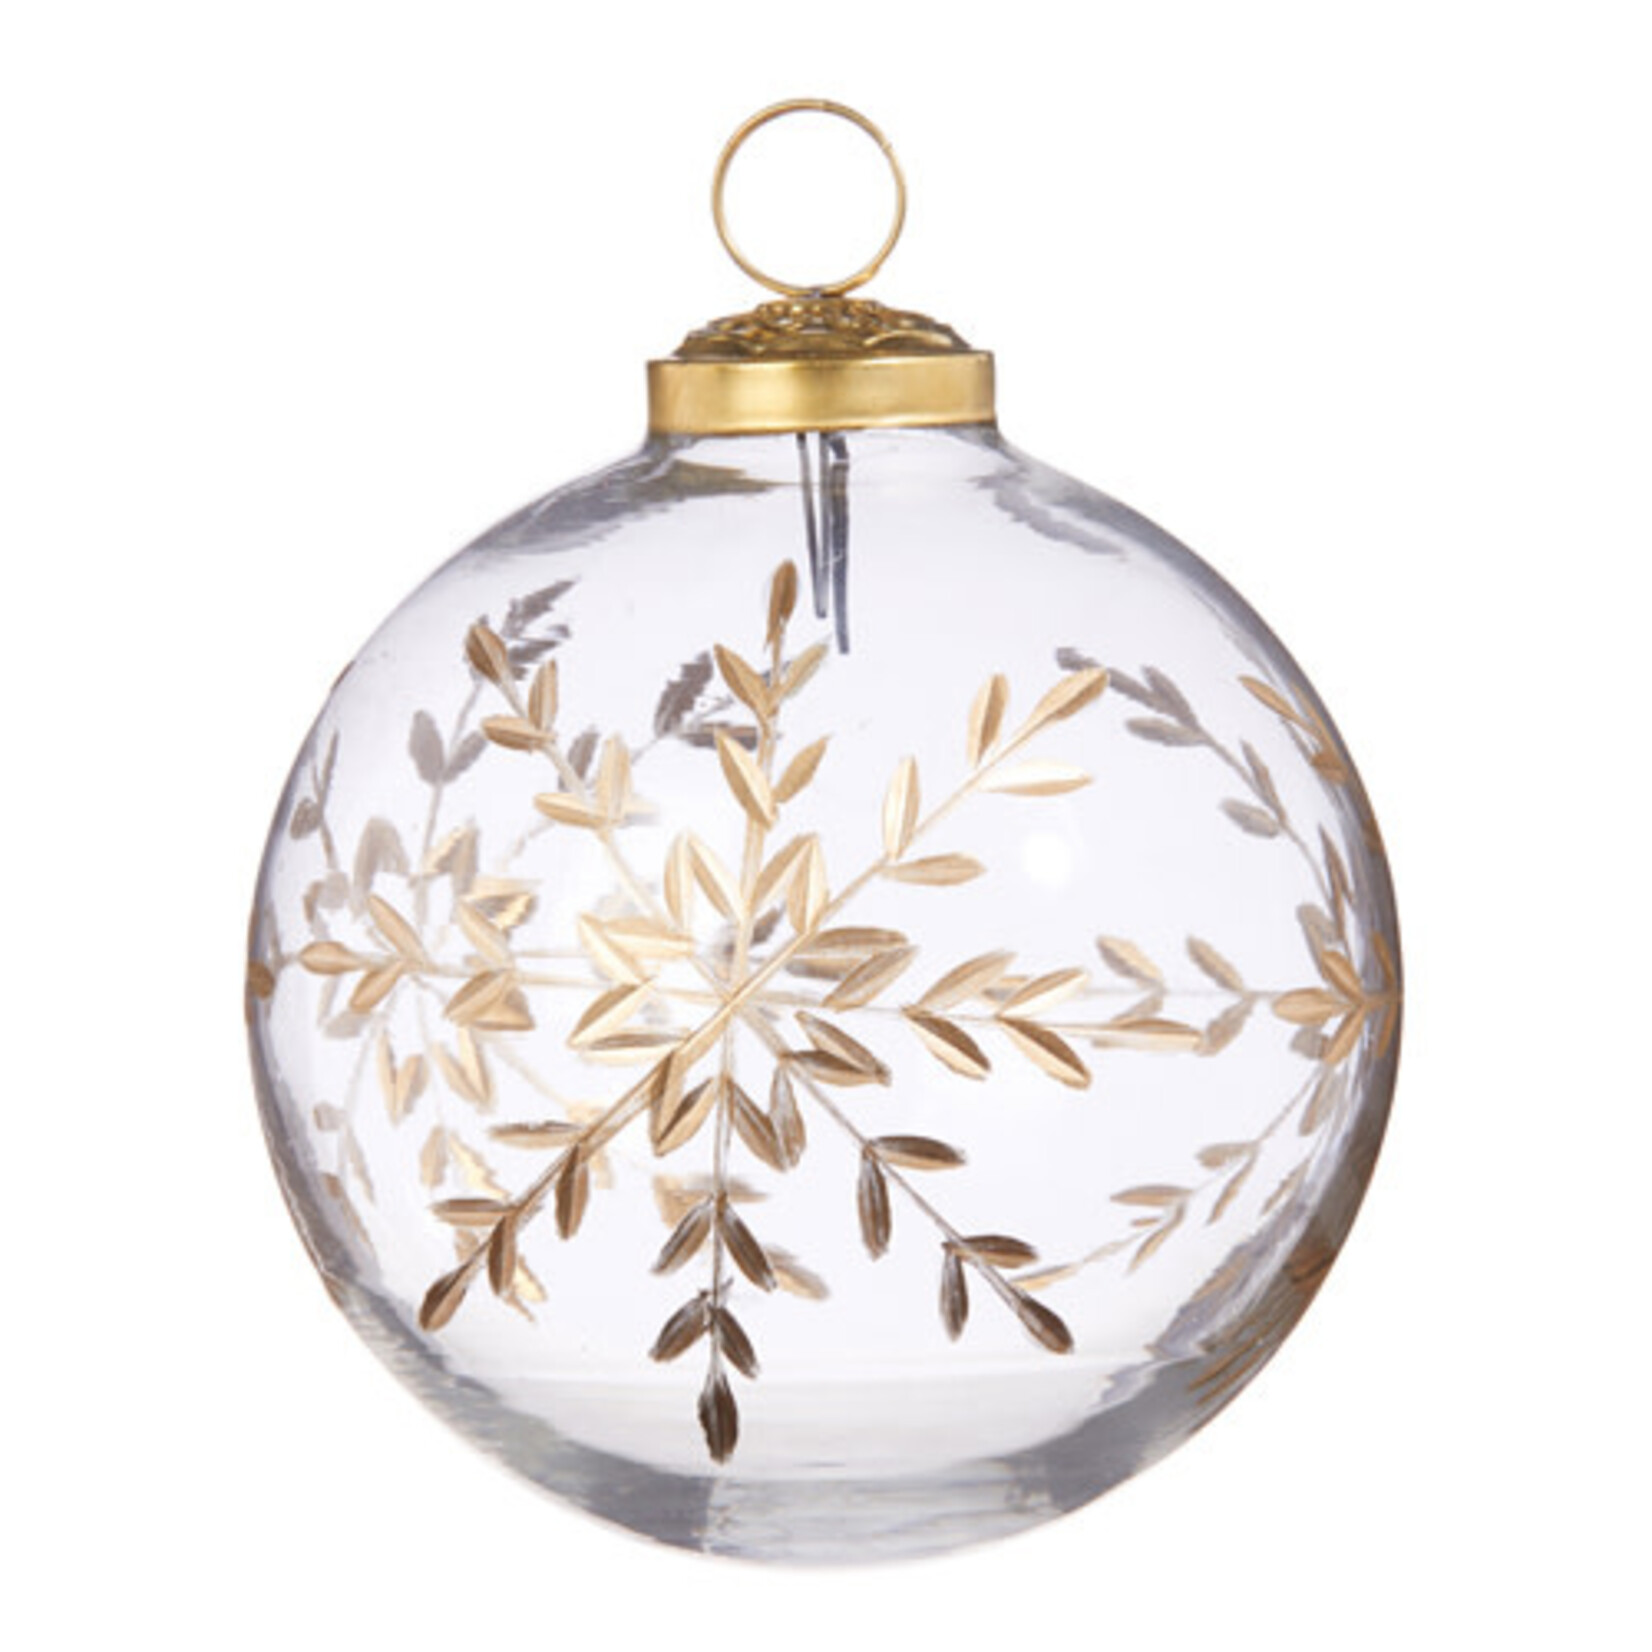 Gold Etched Snowflake Ball Ornament 4"